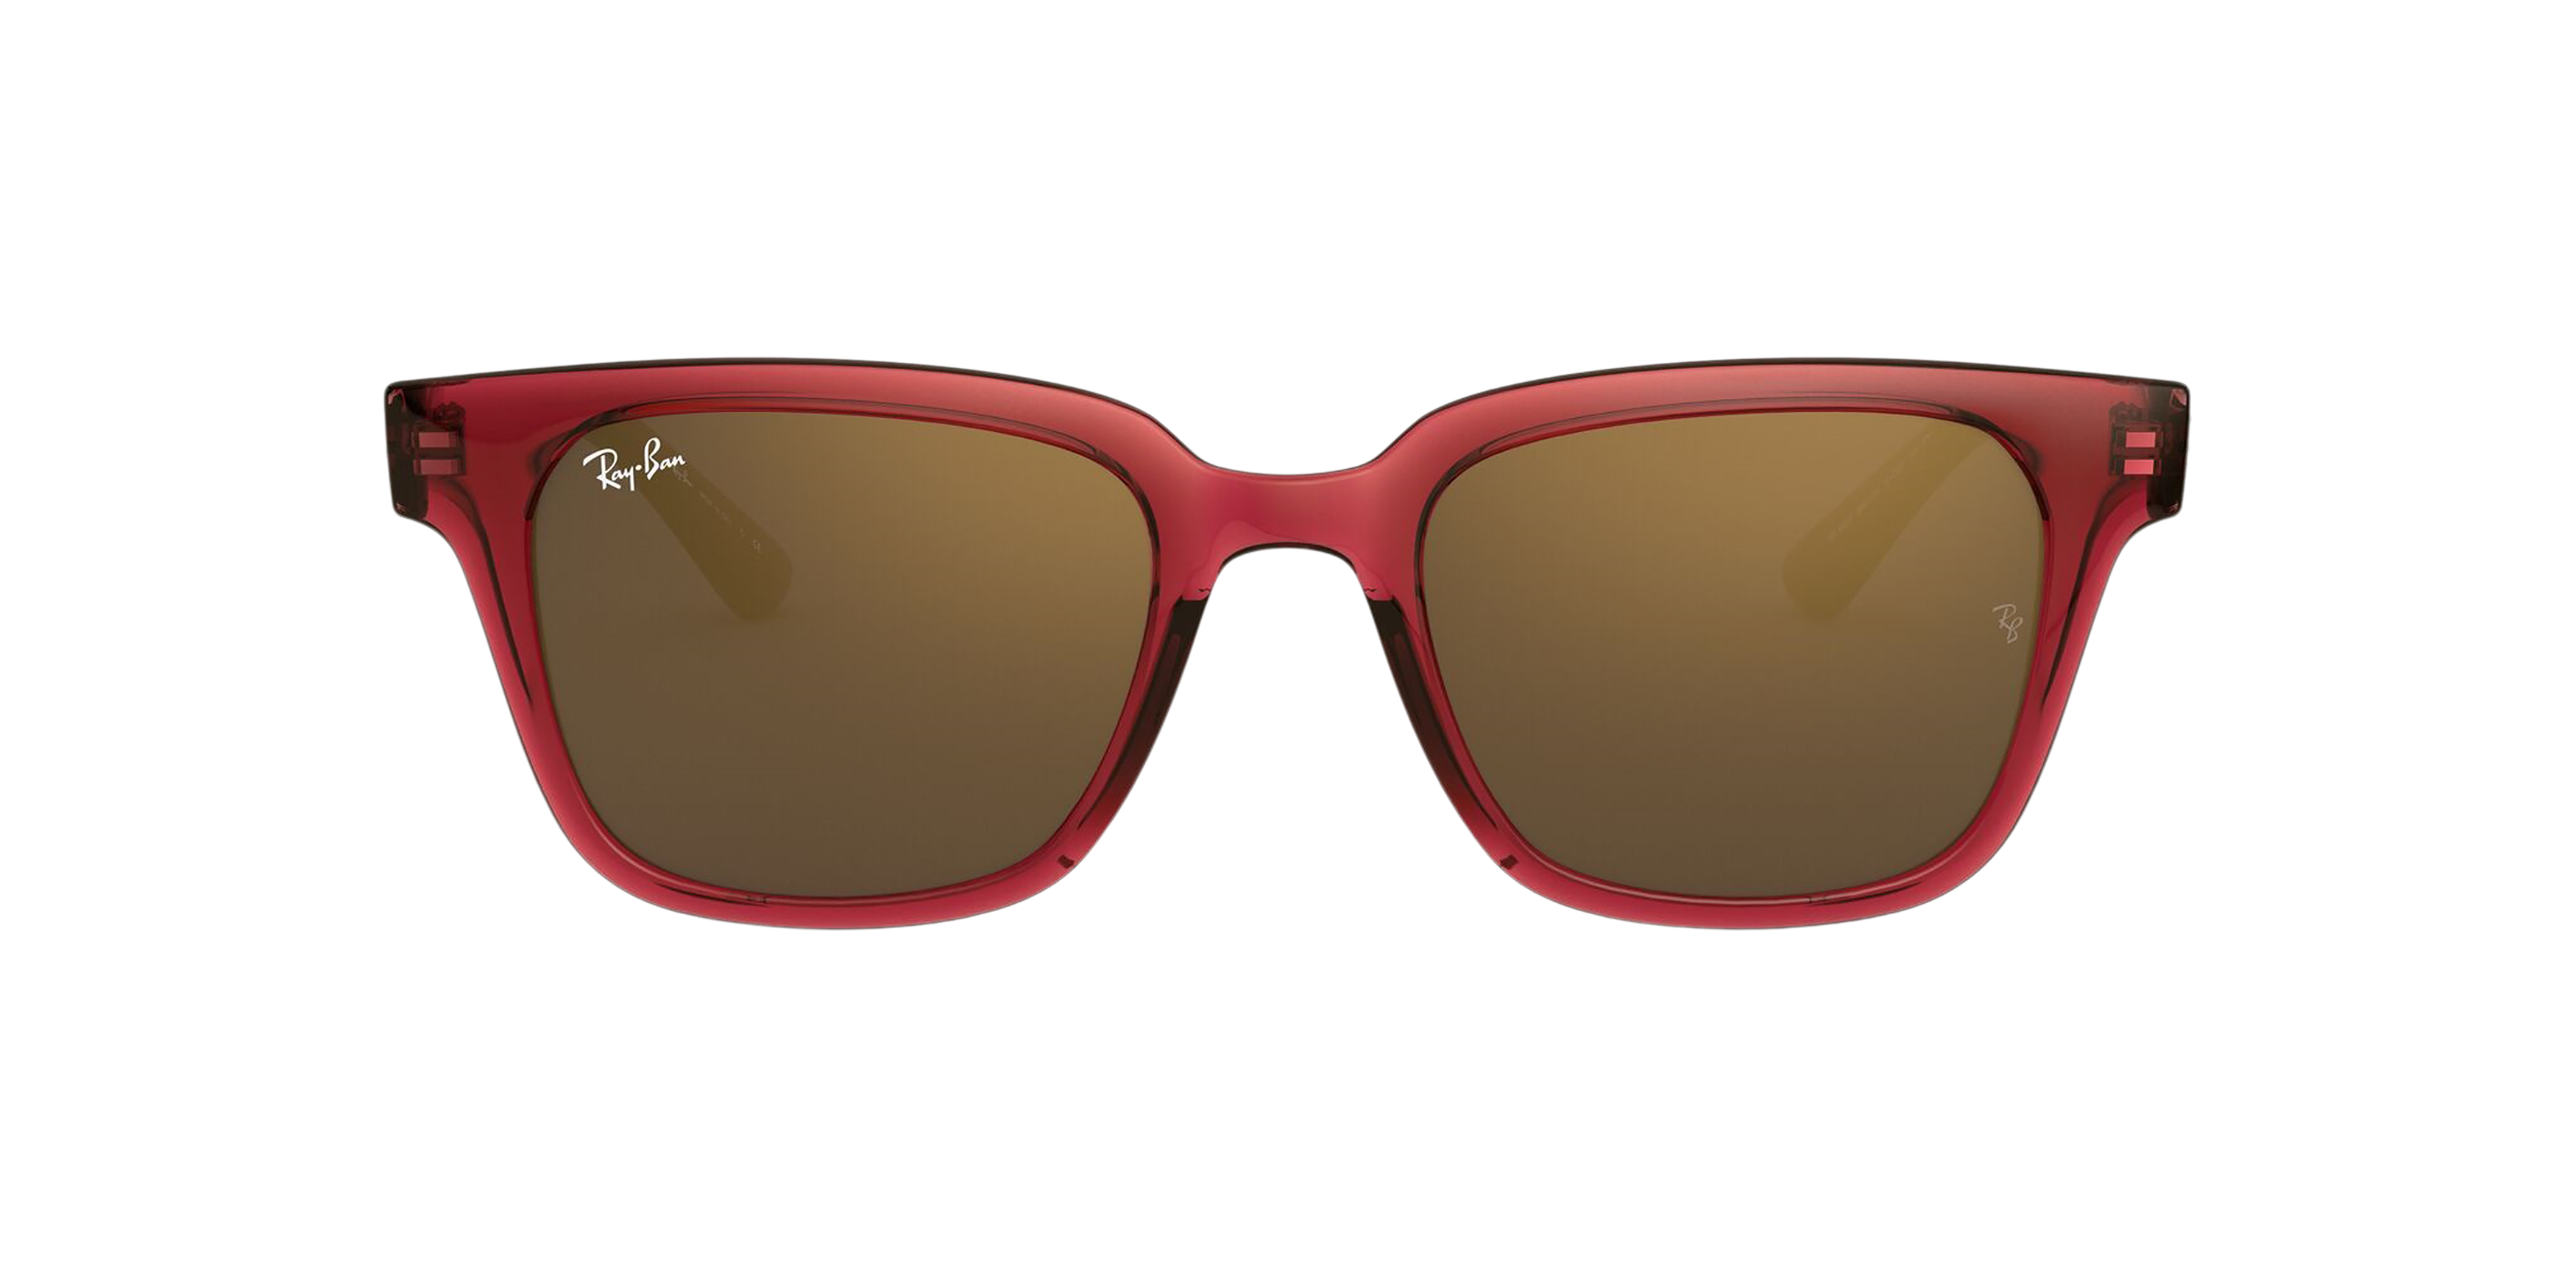 [products.image.front] Ray-Ban RB4323 645193